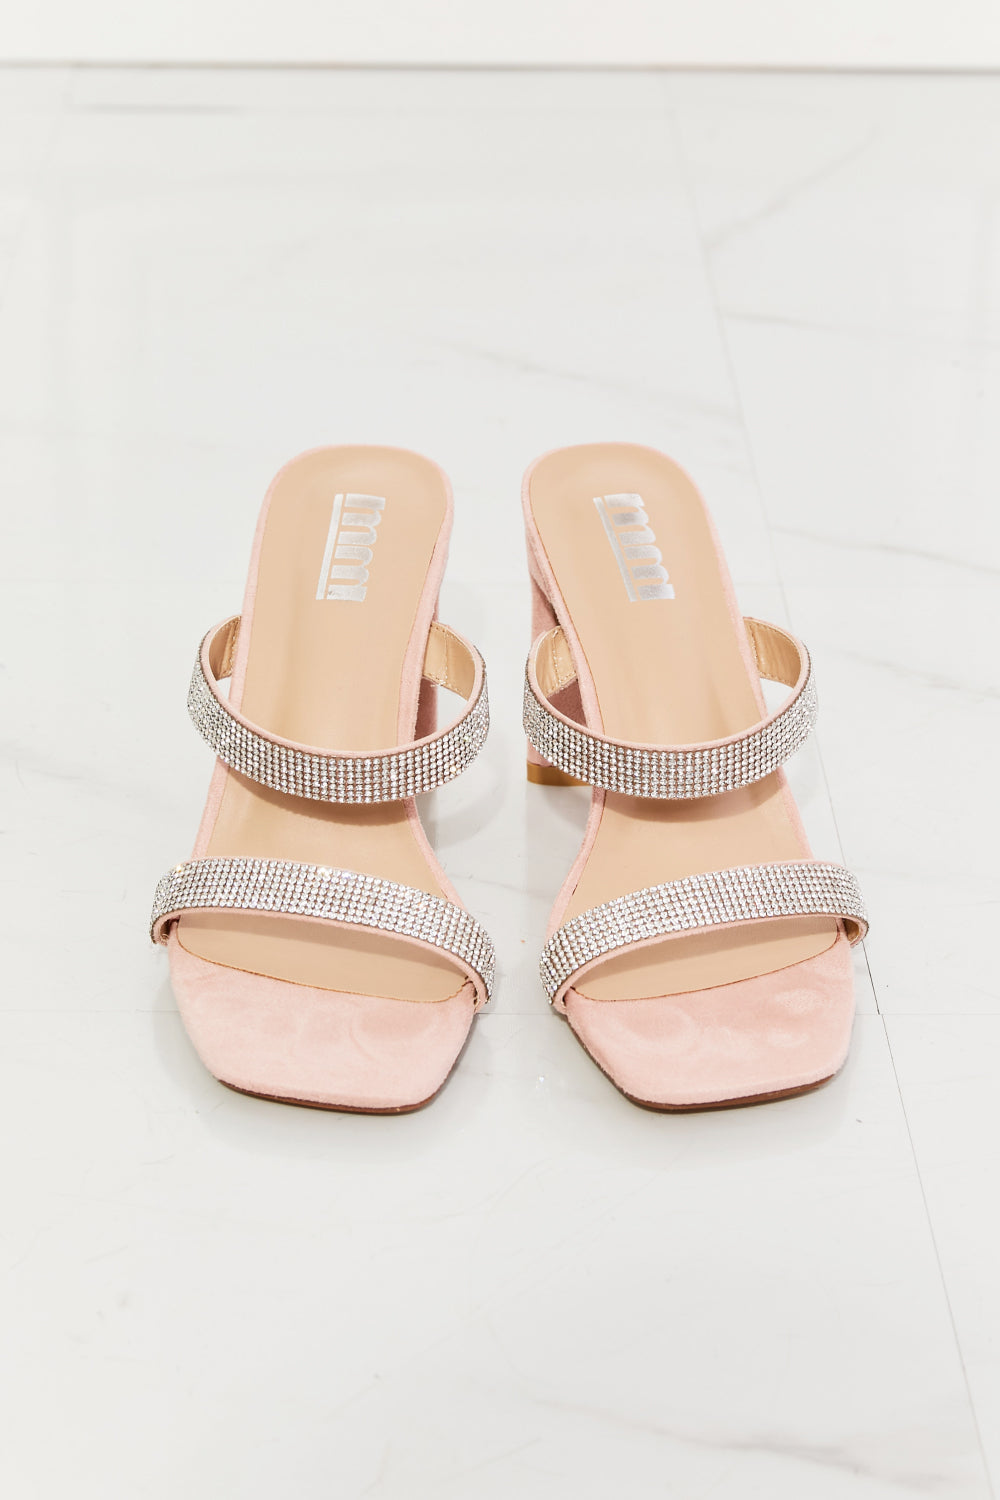 MMShoes Leave A Little Sparkle Rhinestone Block Heel Sandal in Pink - Thandynie